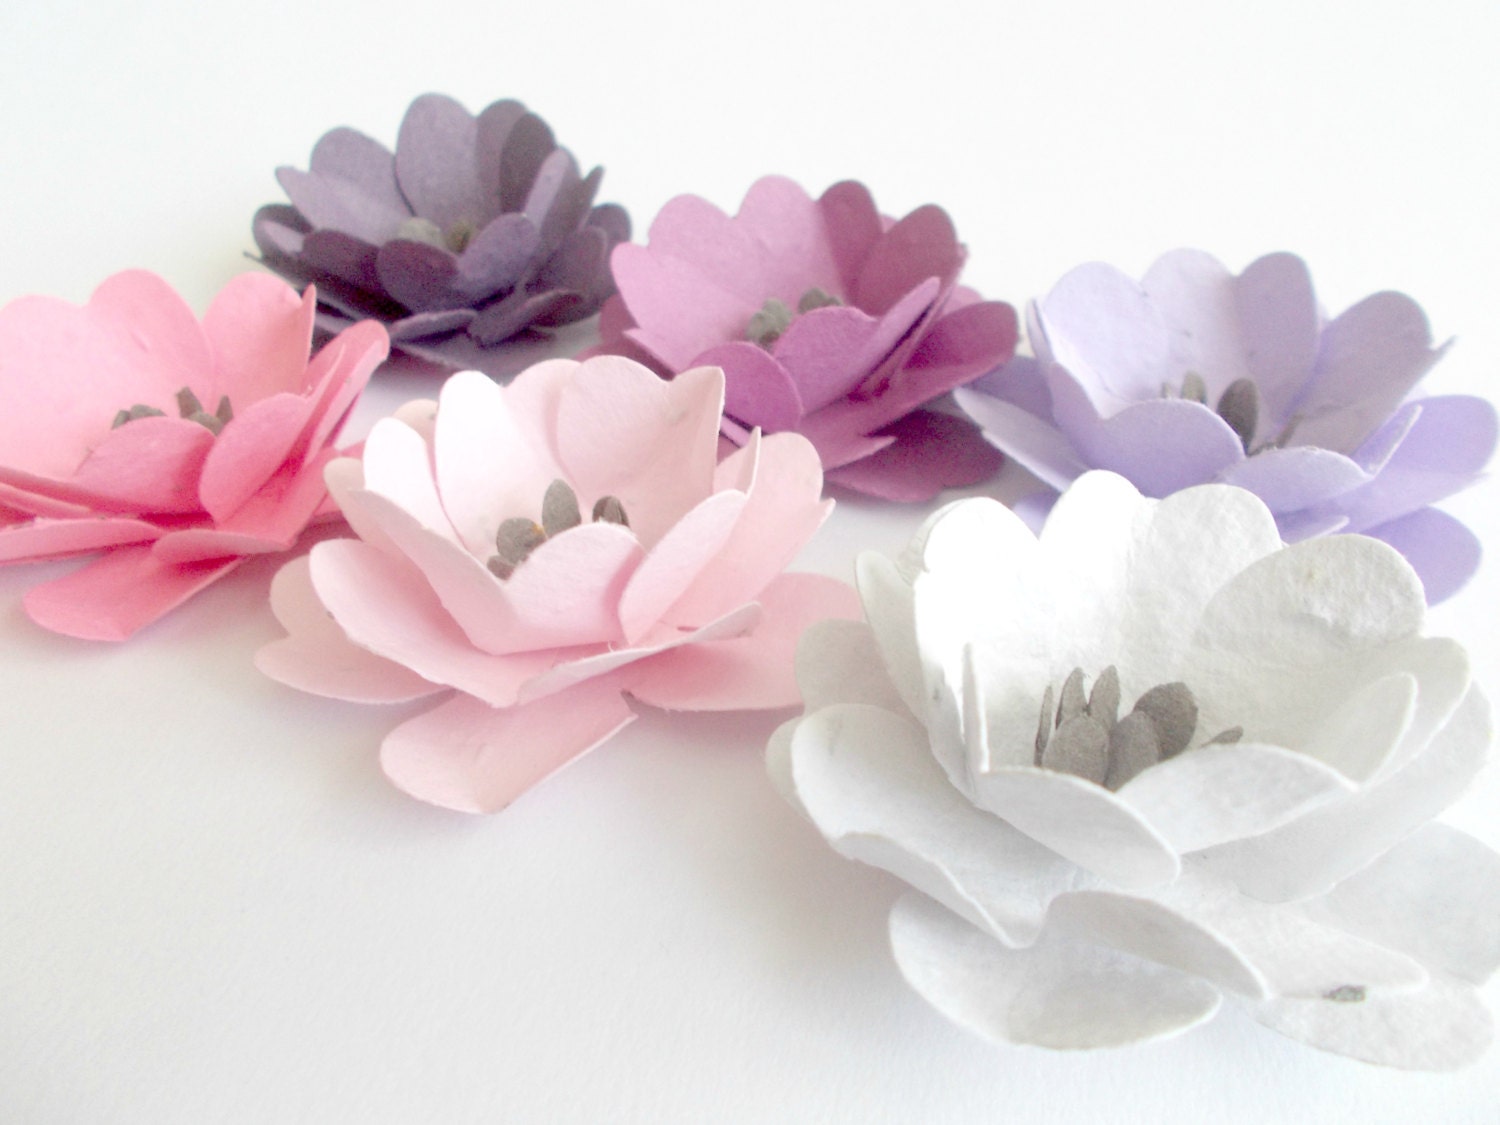 100 Anemone Wedding Flowers -  Seed Paper Embedded With Wildflower Seeds - Plantable Seed Favors